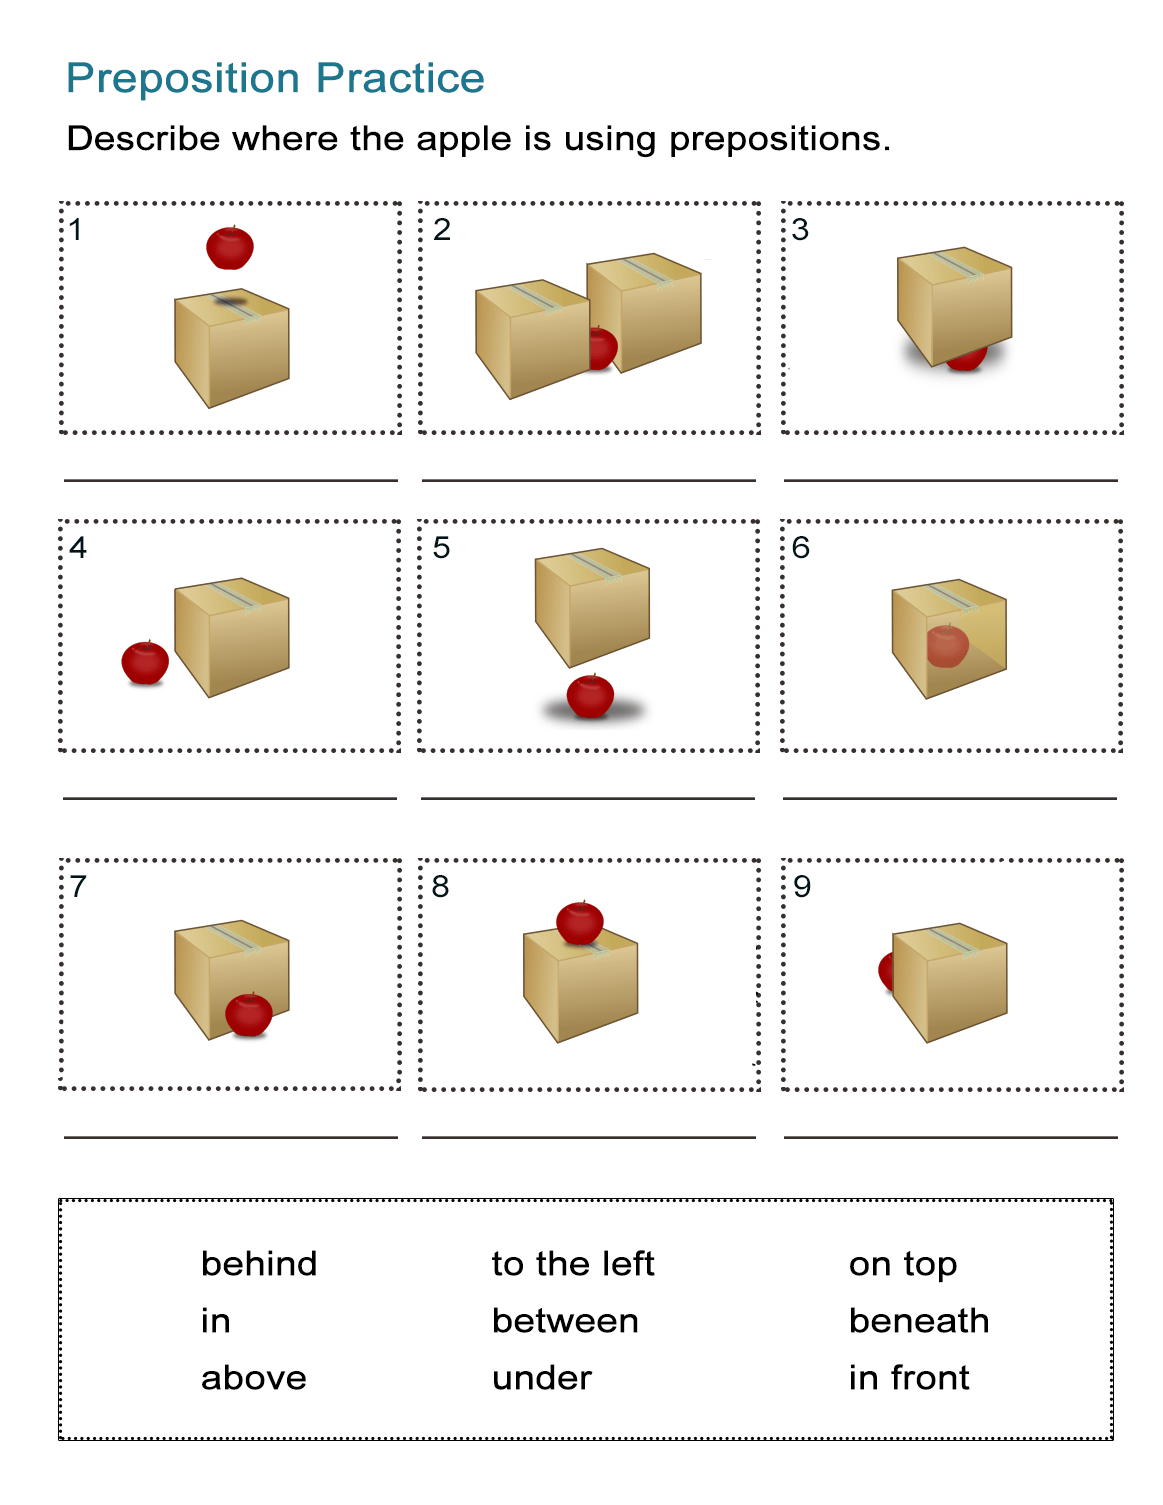 prepositions-of-location-worksheet-where-is-the-apple-all-esl